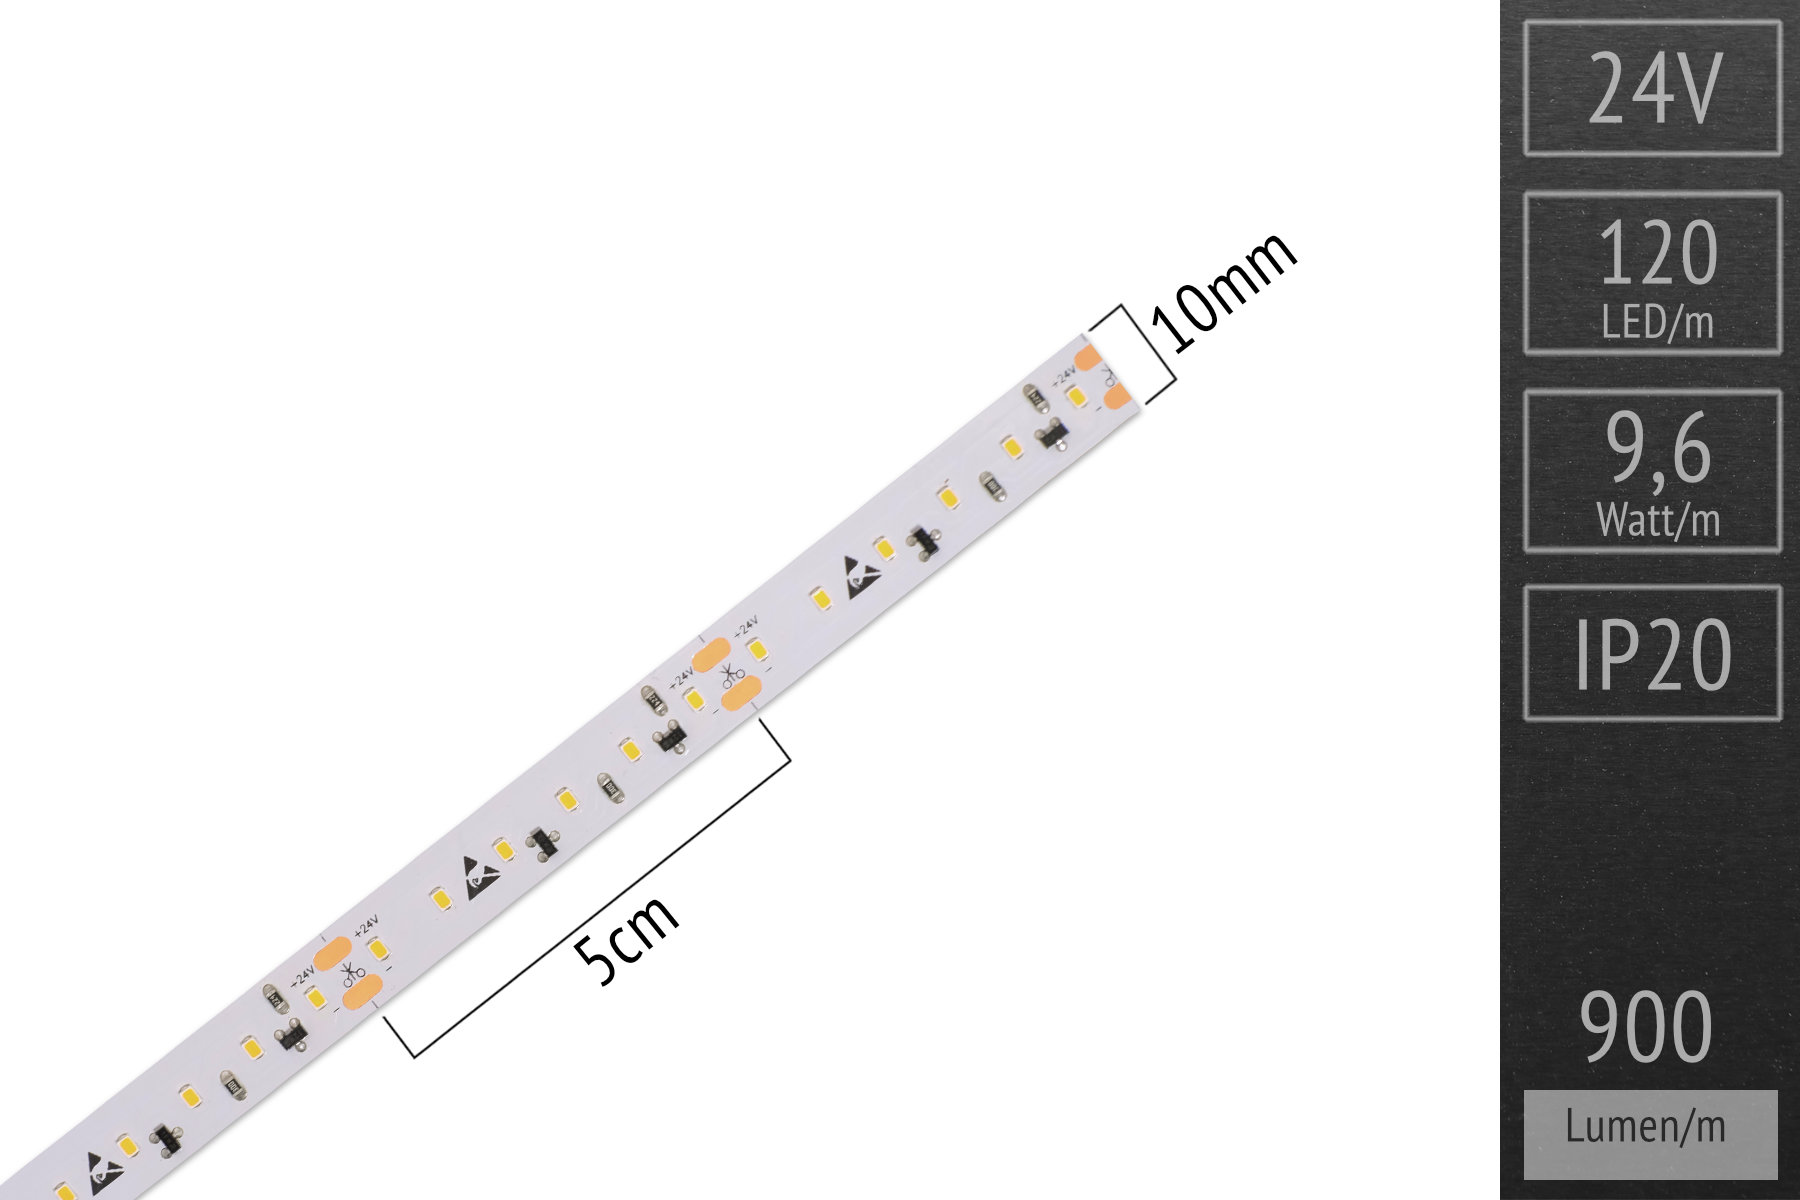 Accent applications: LED Strip 2016 -120 LED/m - 900 lm/m - 6.000K cool white - IP20 5m roll